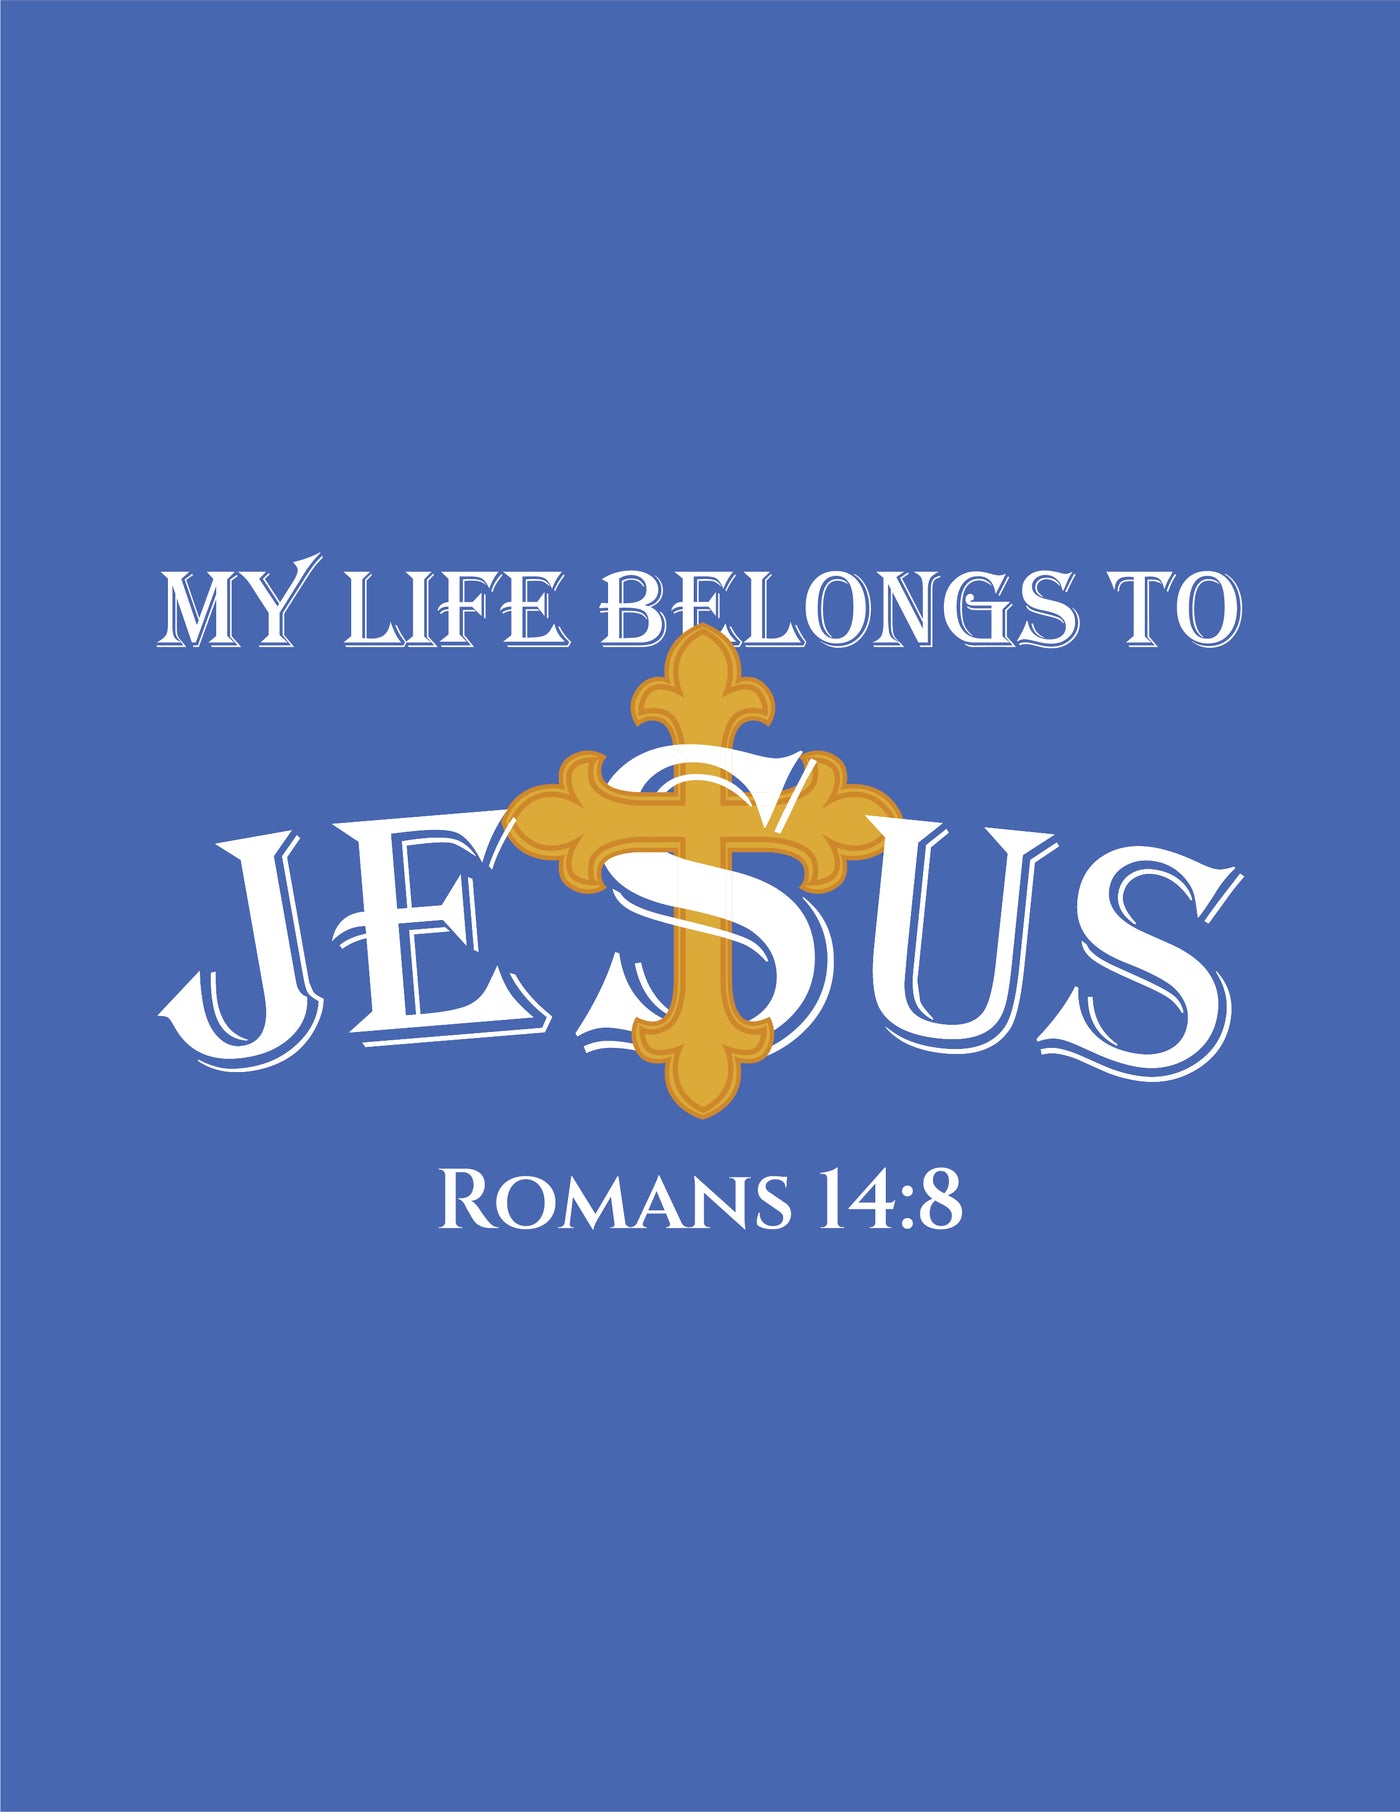 F&H Christian My Life Belongs To Jesus Women's T-Shirt - Faith and Happiness Store